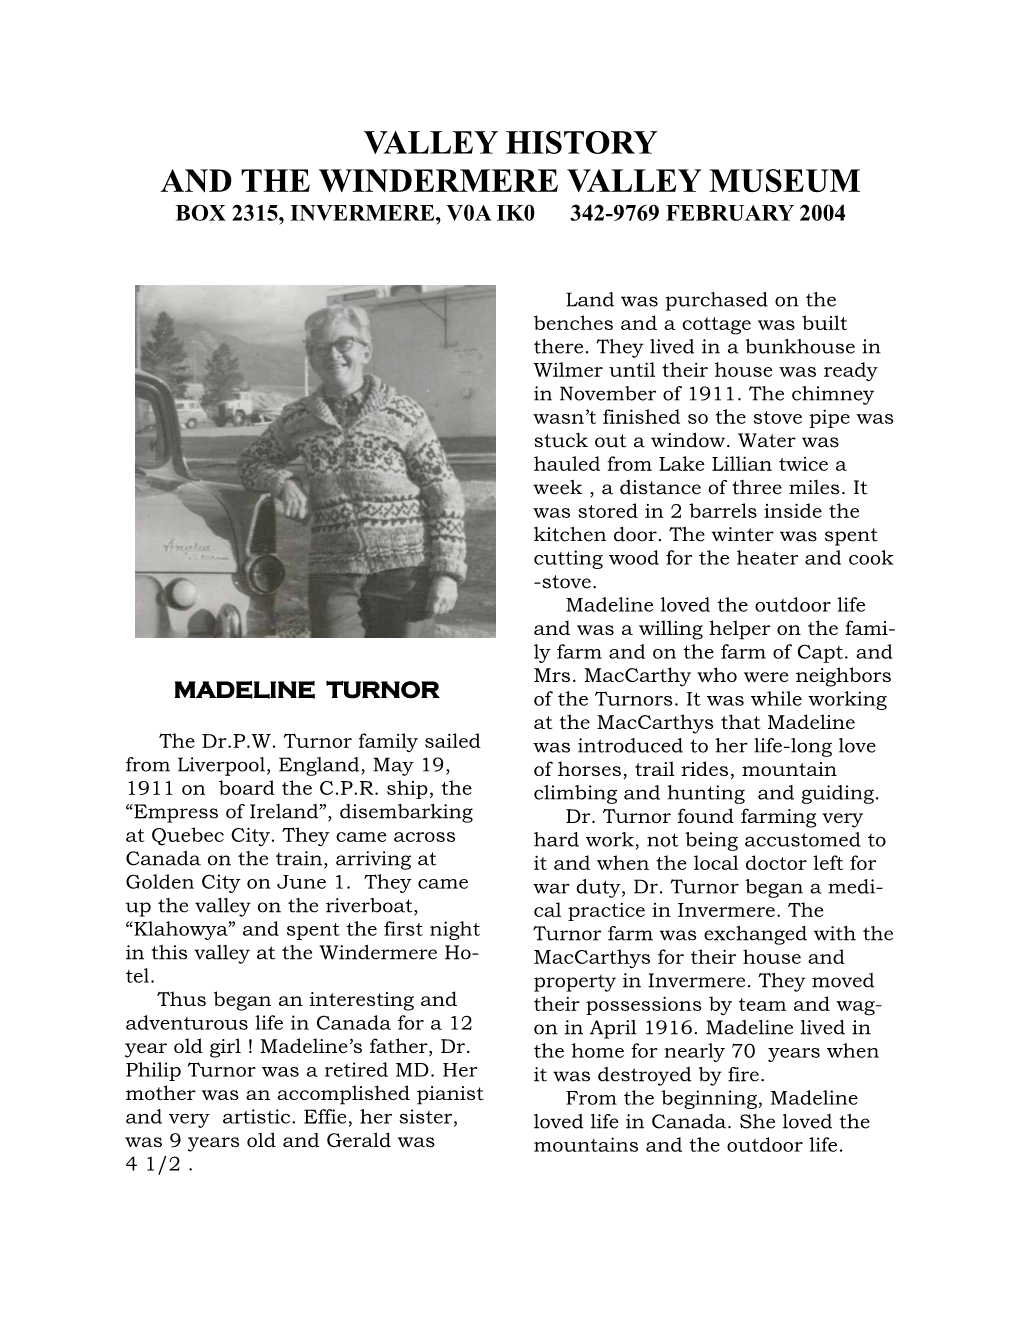 Valley History and the Windermere Valley Museum Box 2315, Invermere, V0a Ik0 342-9769 February 2004